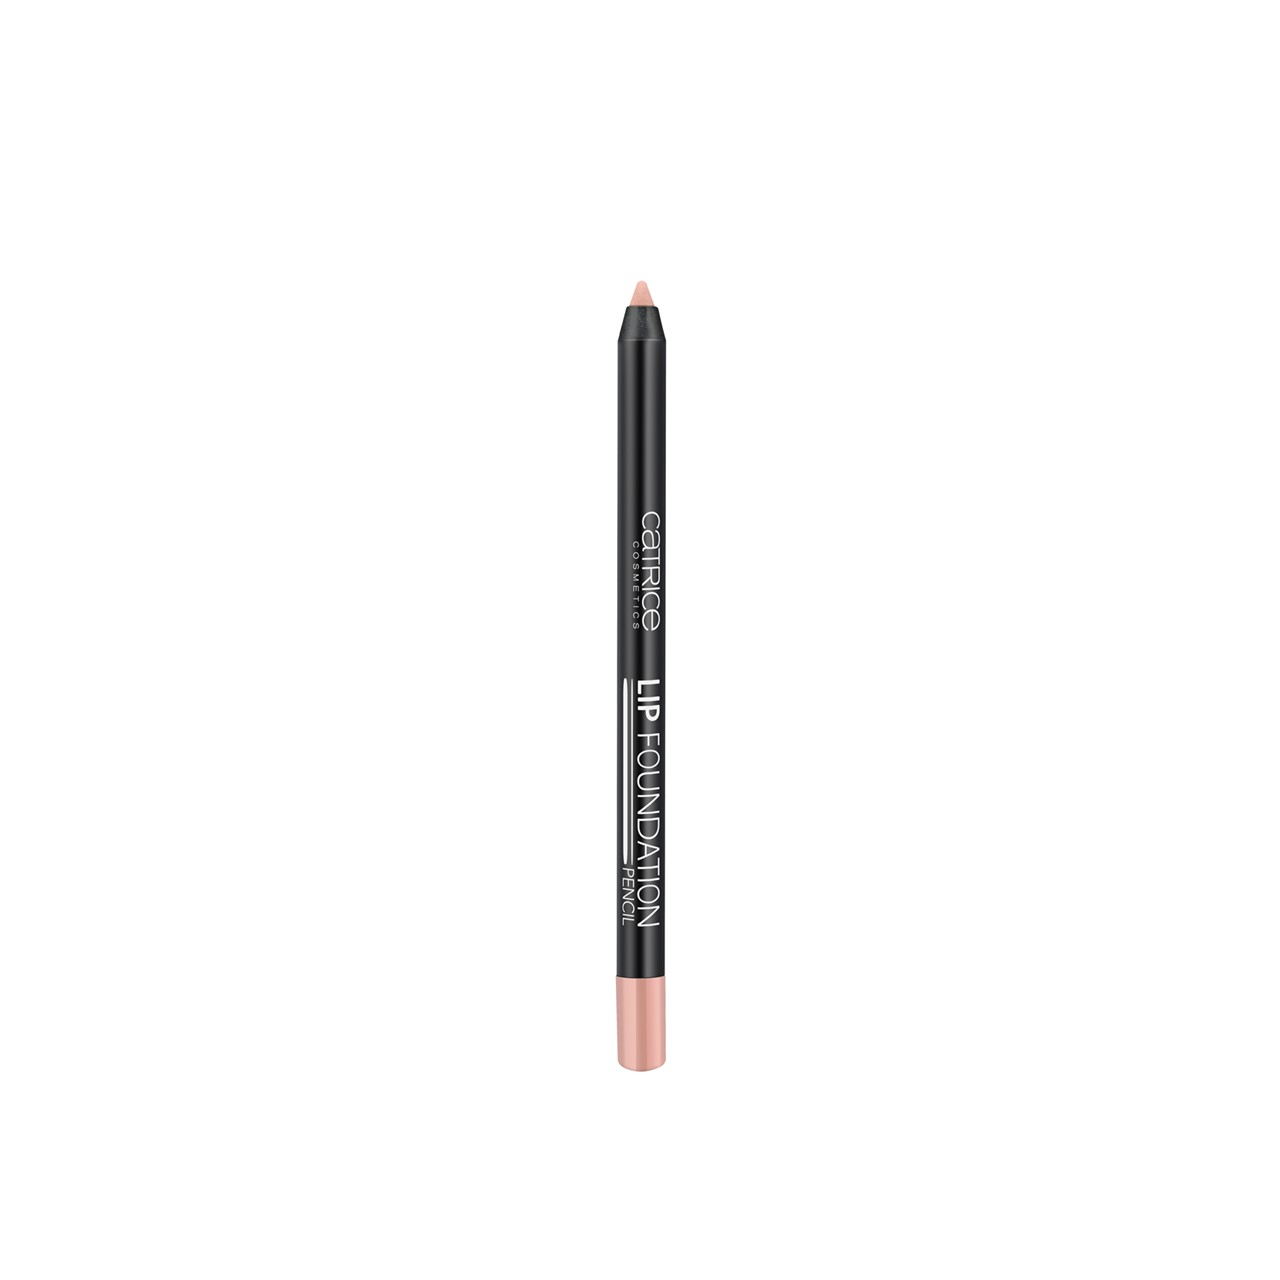 Catrice Lip Foundation Pencil 010 Can't You Hear That Super Base?